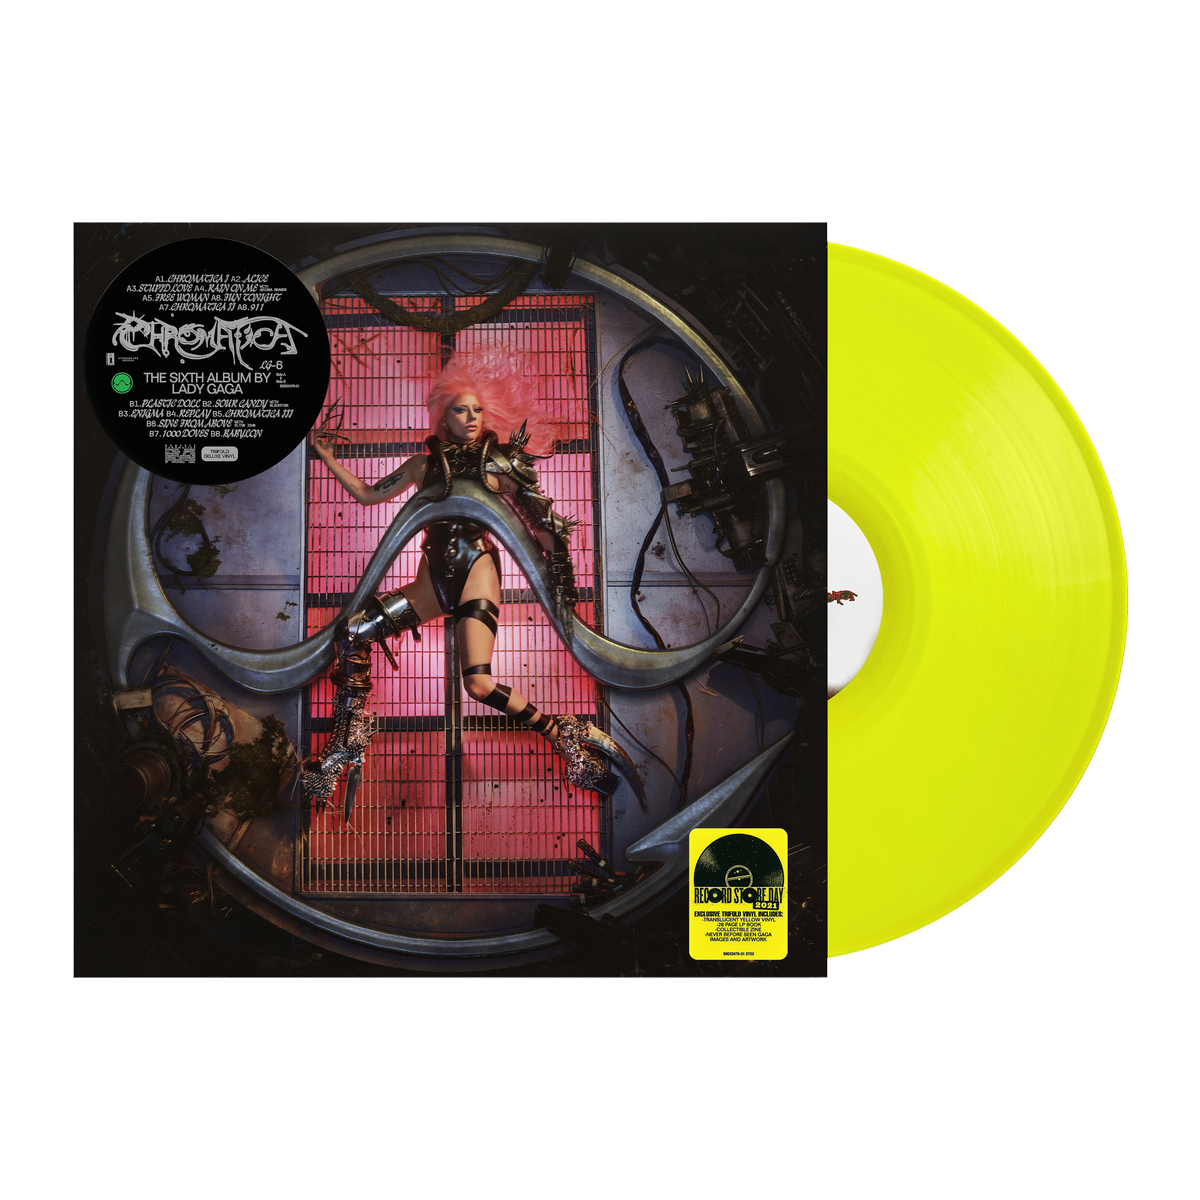 Chromatica (Limited Edition RSD 2021 Exclusive Deluxe Translucent Yellow Vinyl)